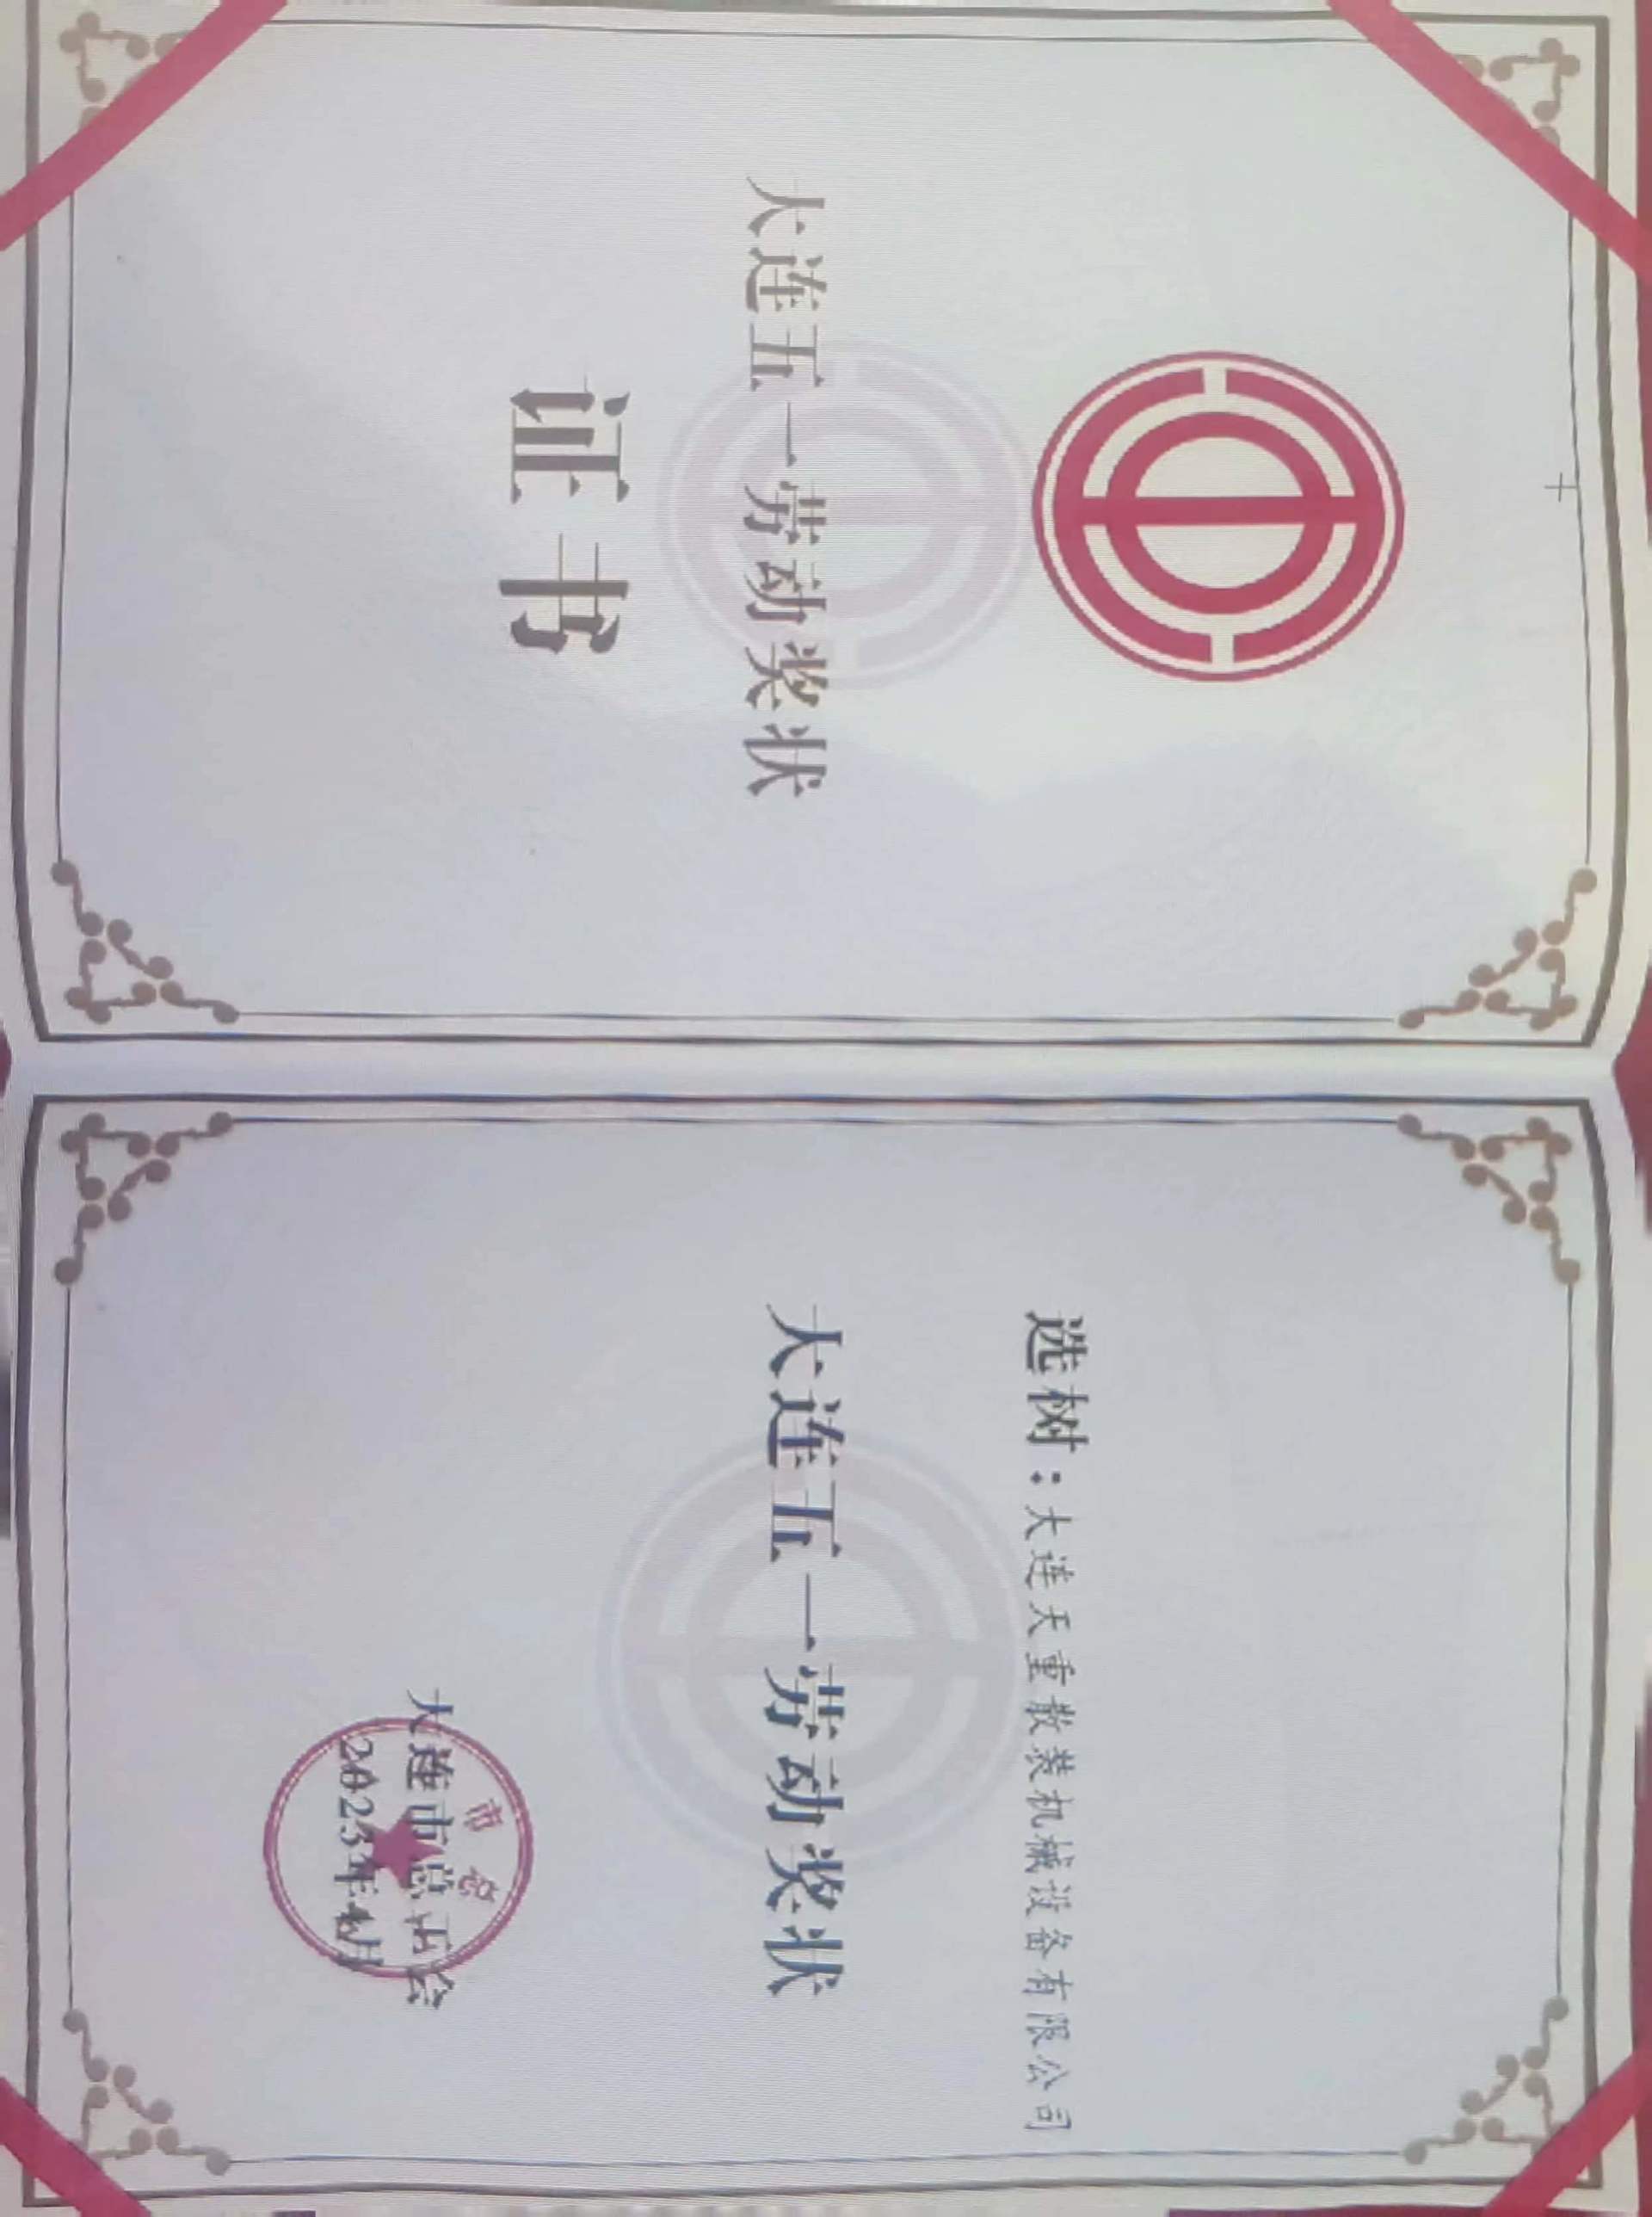 Congratulations to our company for winning the Dalian May 1 Labor Award